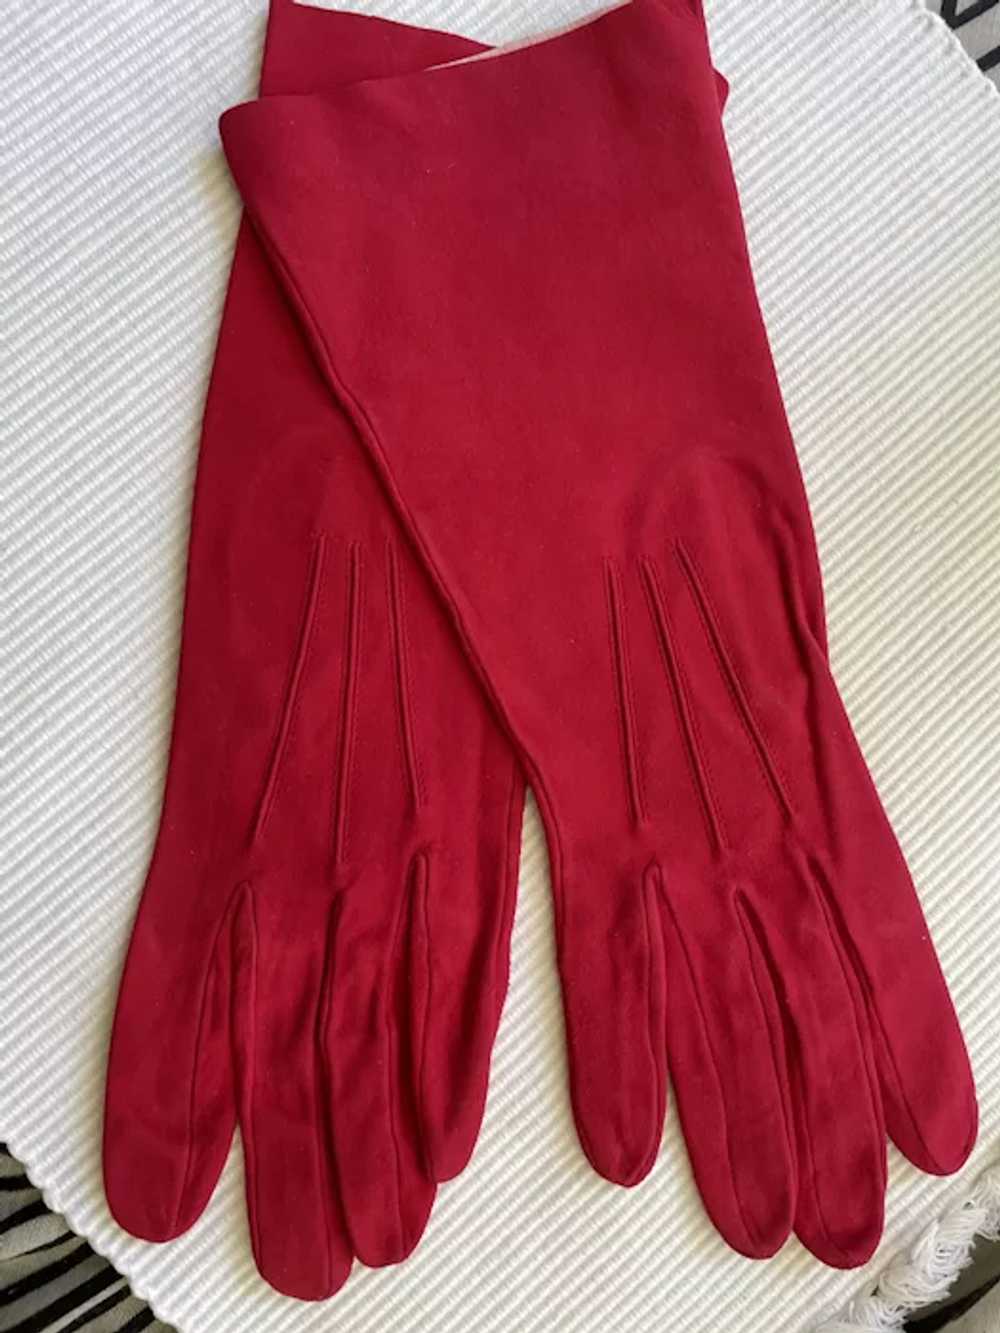 Cherry Red French Suede Gloves - image 3